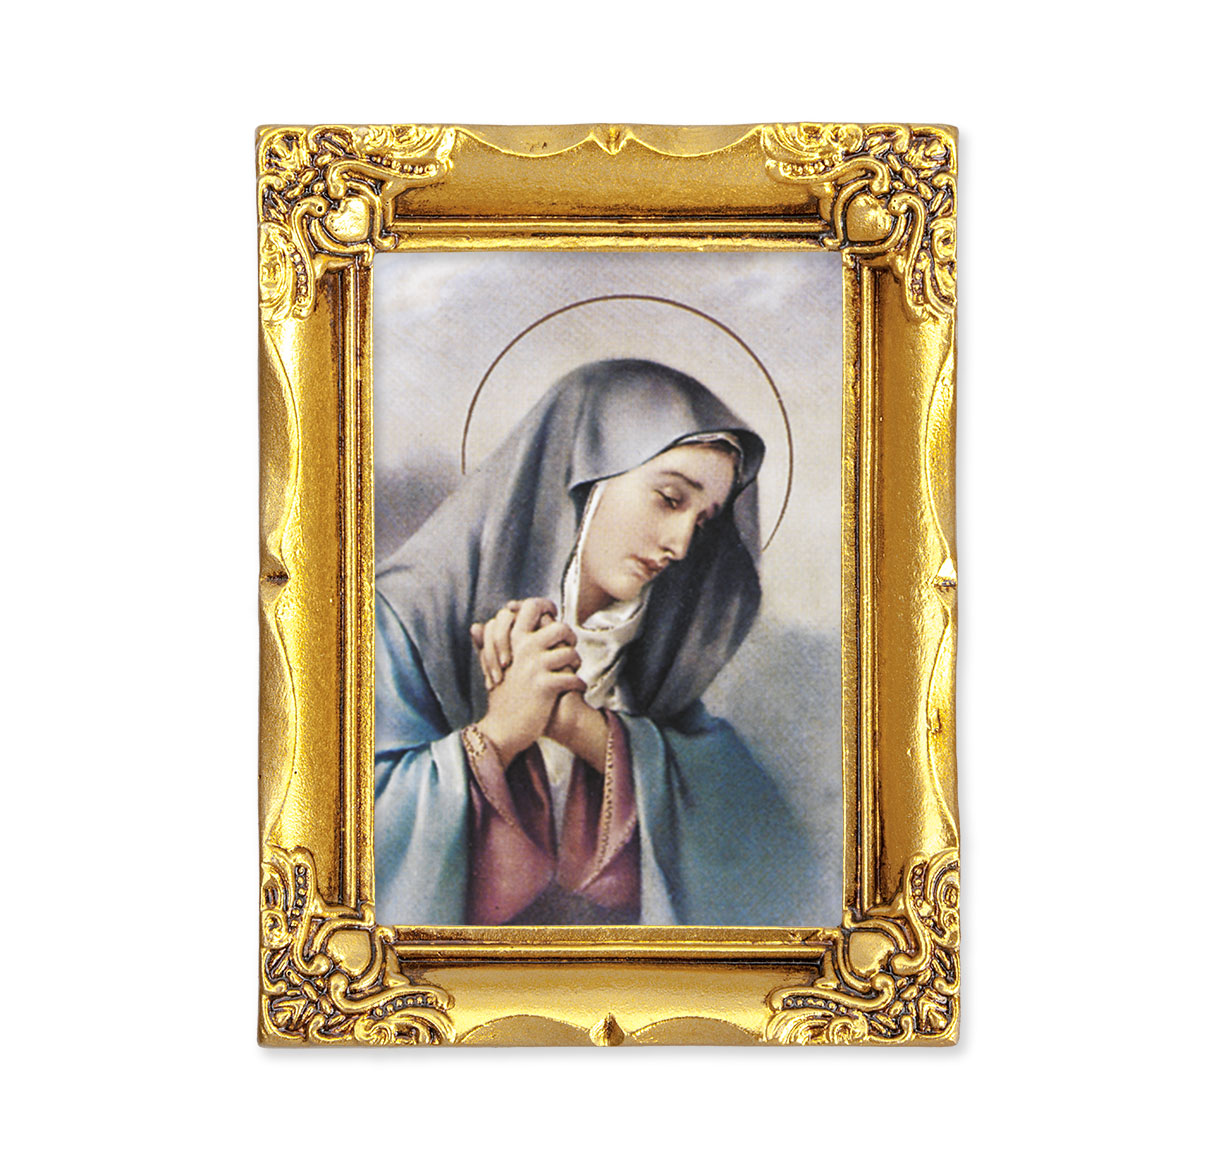 Our Lady of Sorrows Antique Gold Framed Art